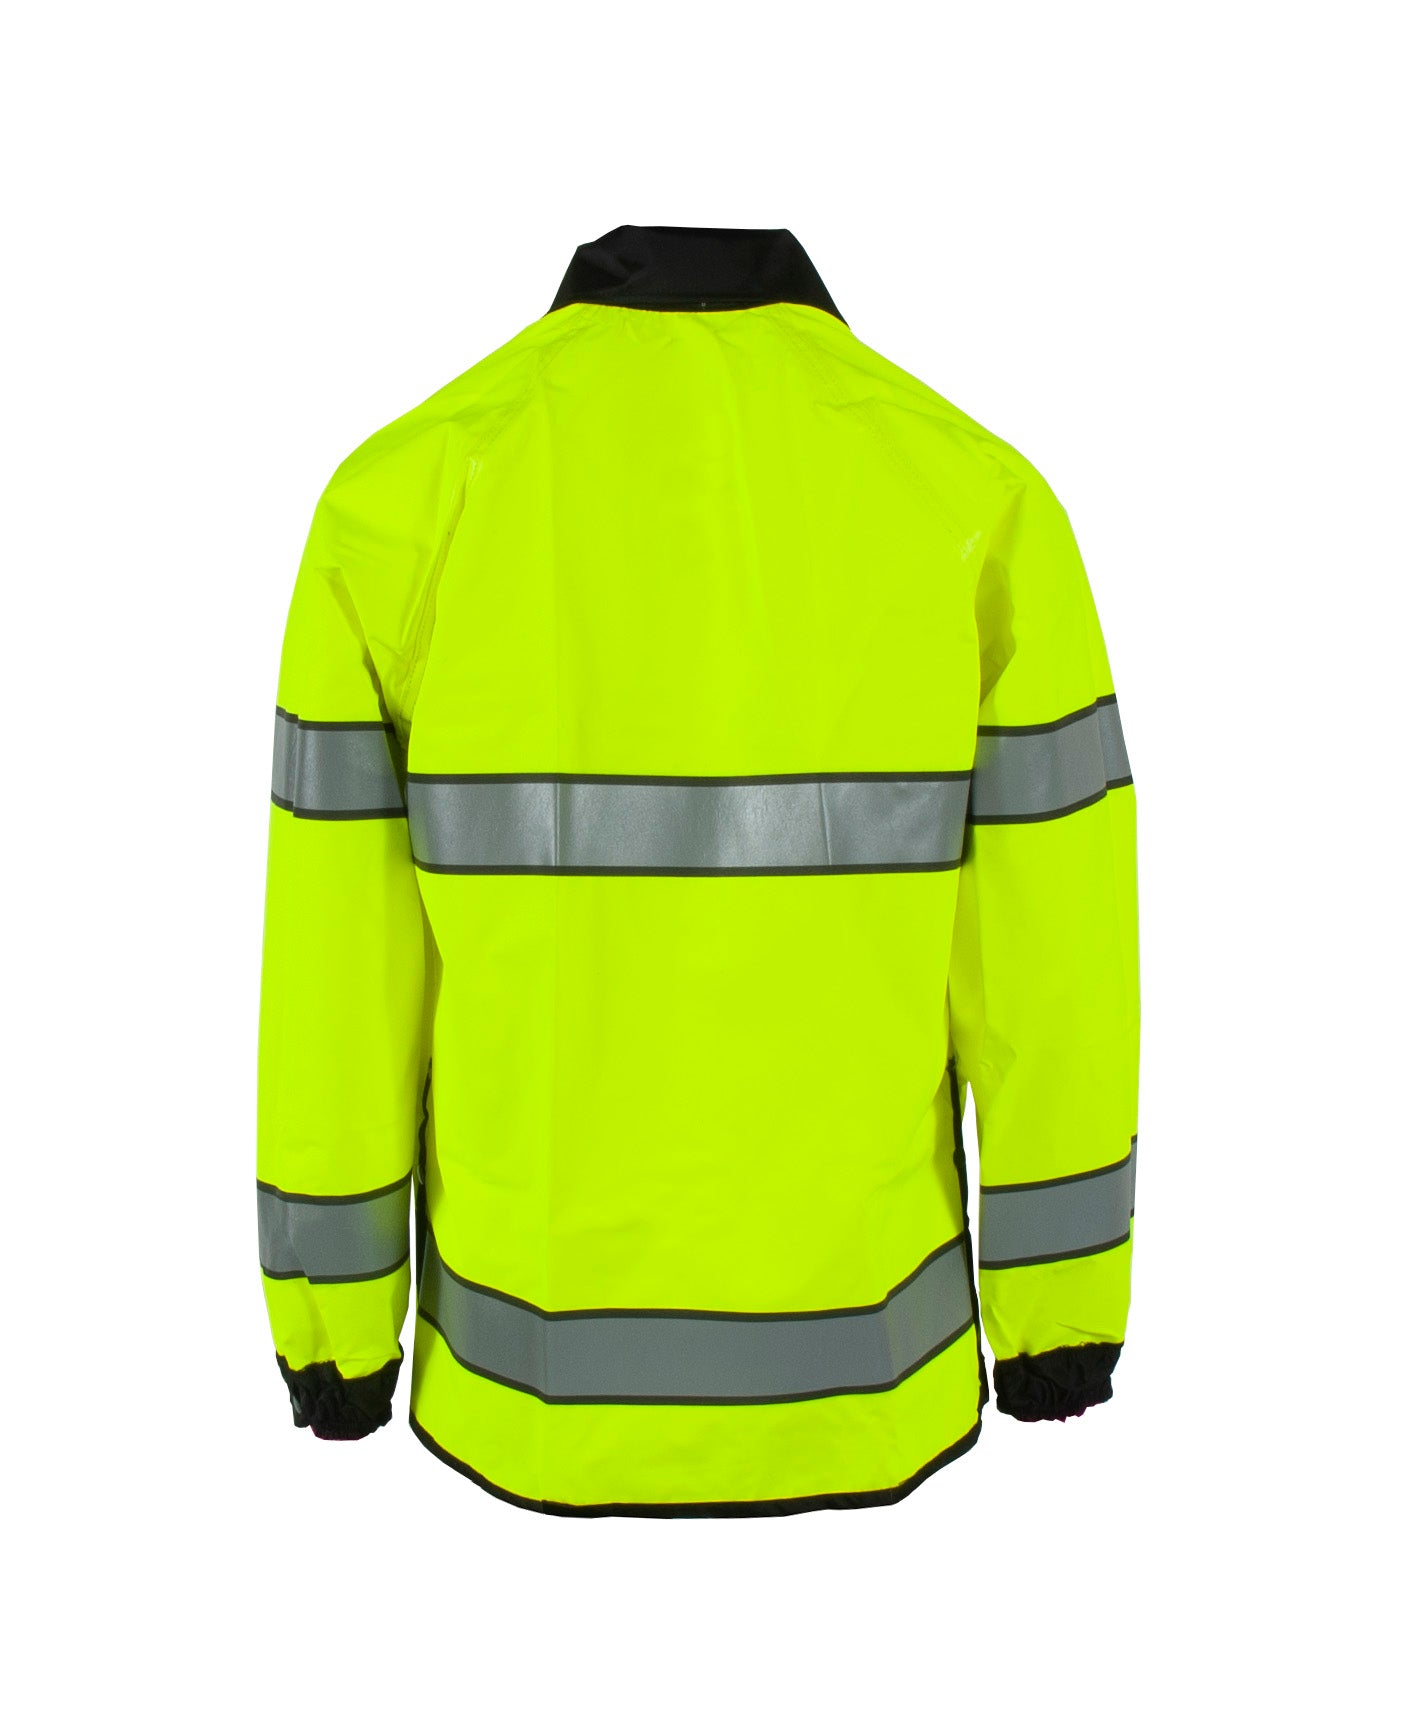 4703RJH3M Safe Officer Reversible Rain Jacket with Reflective Taping